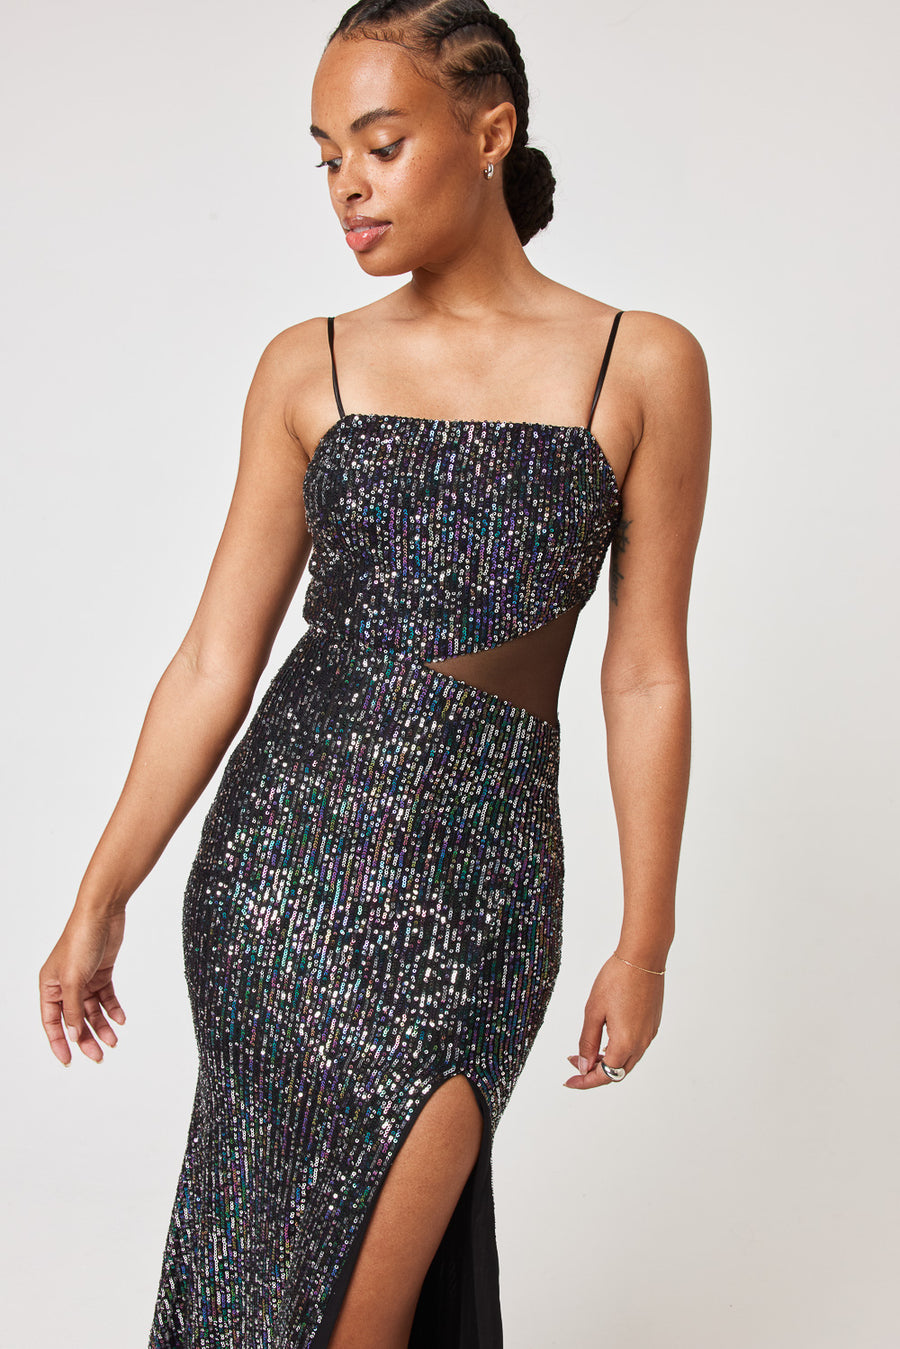 Black Silver Teal Mesh Cut Out Gown - Trixxi Clothing